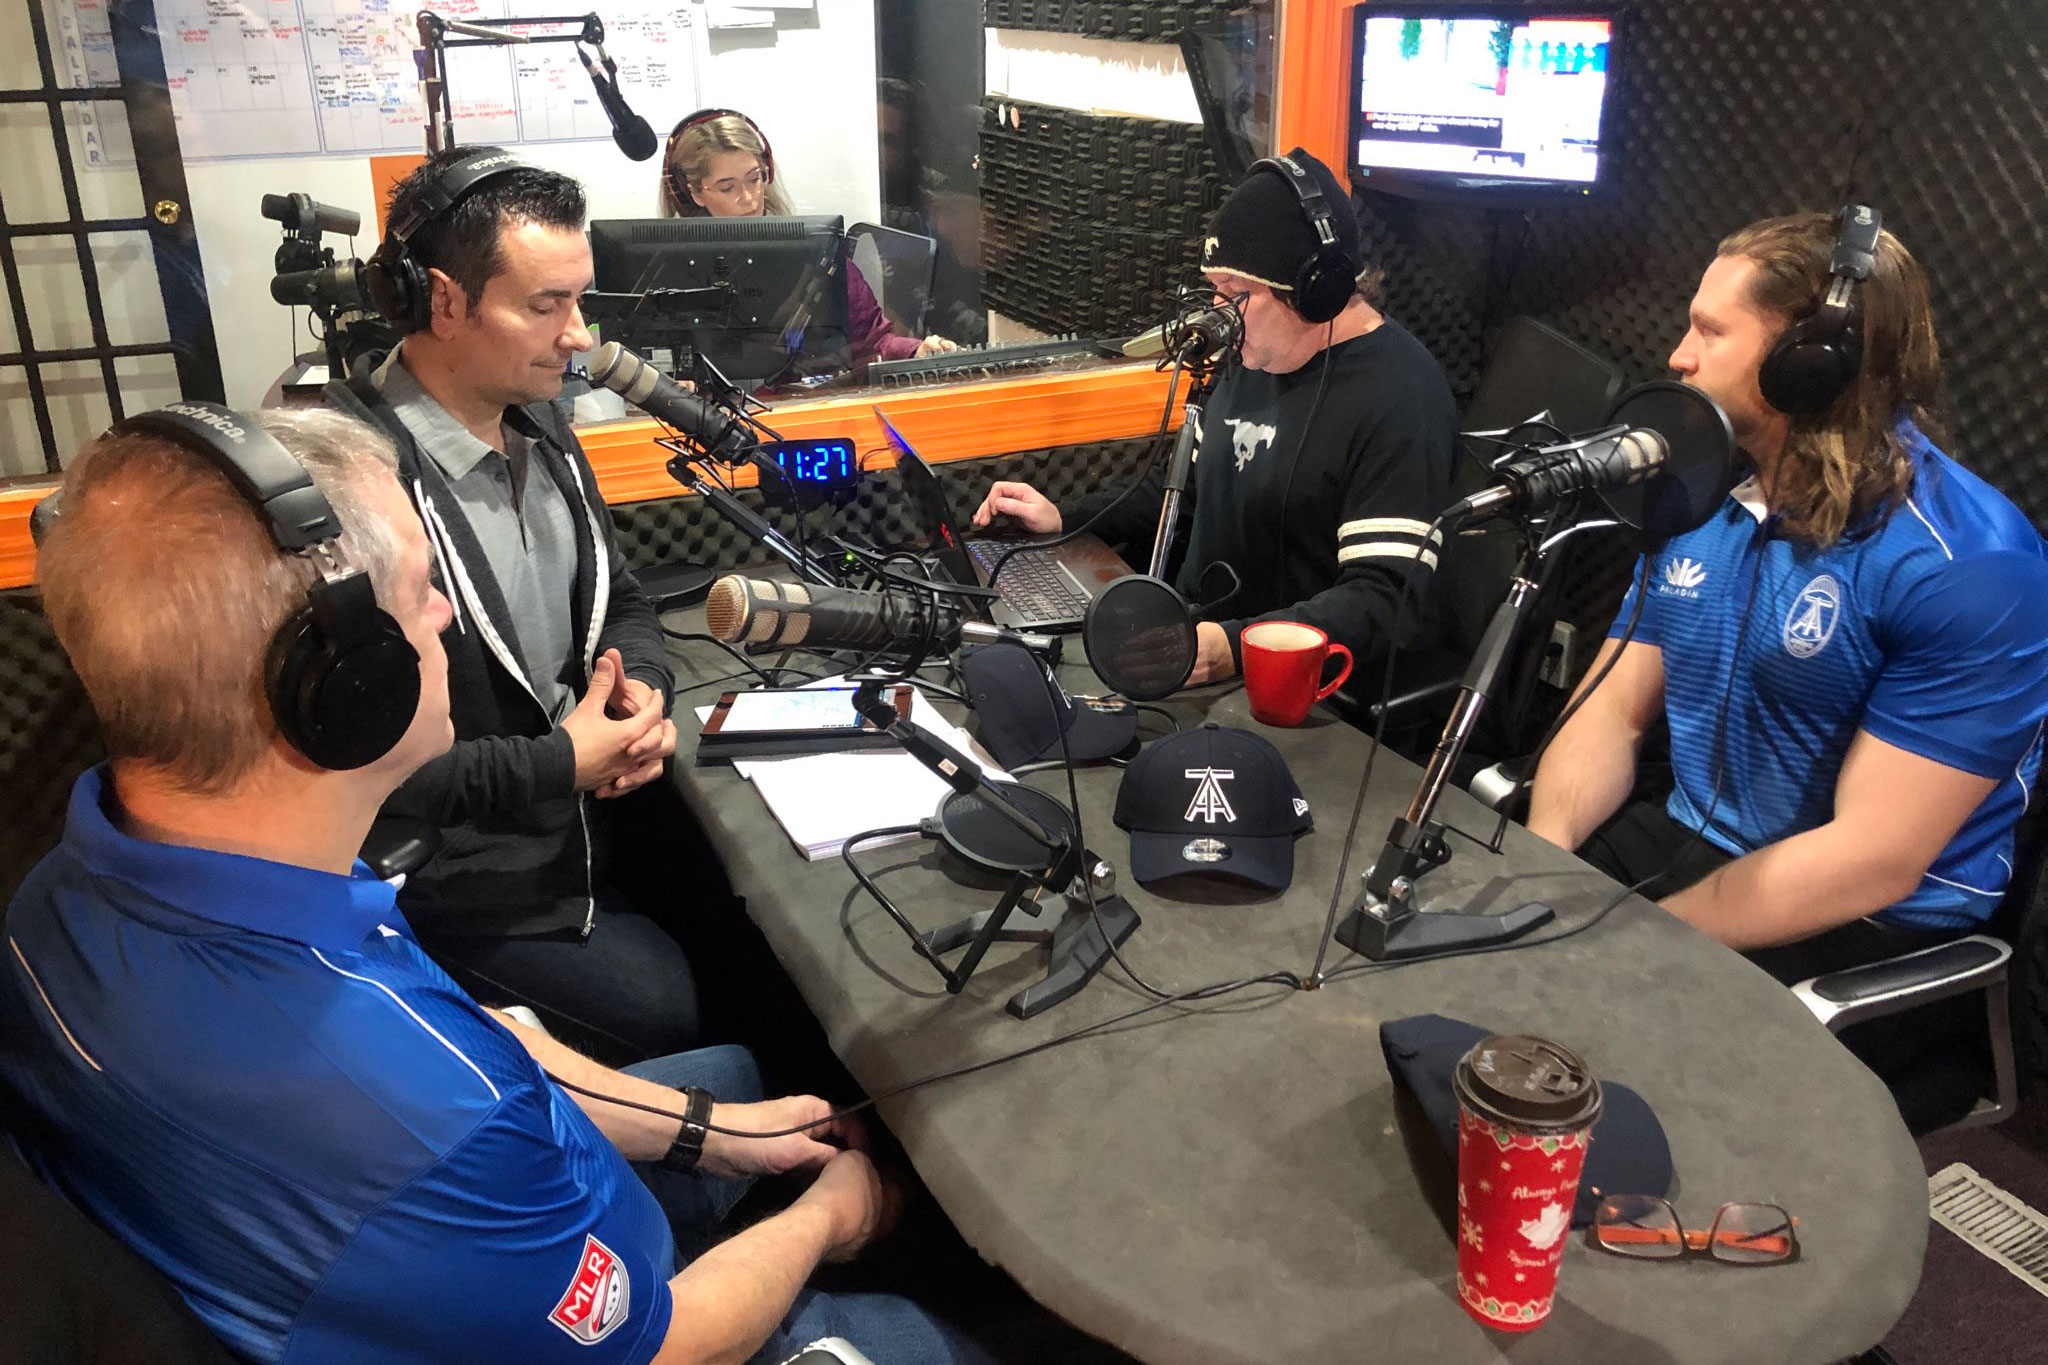 Toronto Arrows Team Up with Sauga 960 AM’s The Raw Mike Richards Show to Deliver Weekly ‘Arrows Up!’ Segment